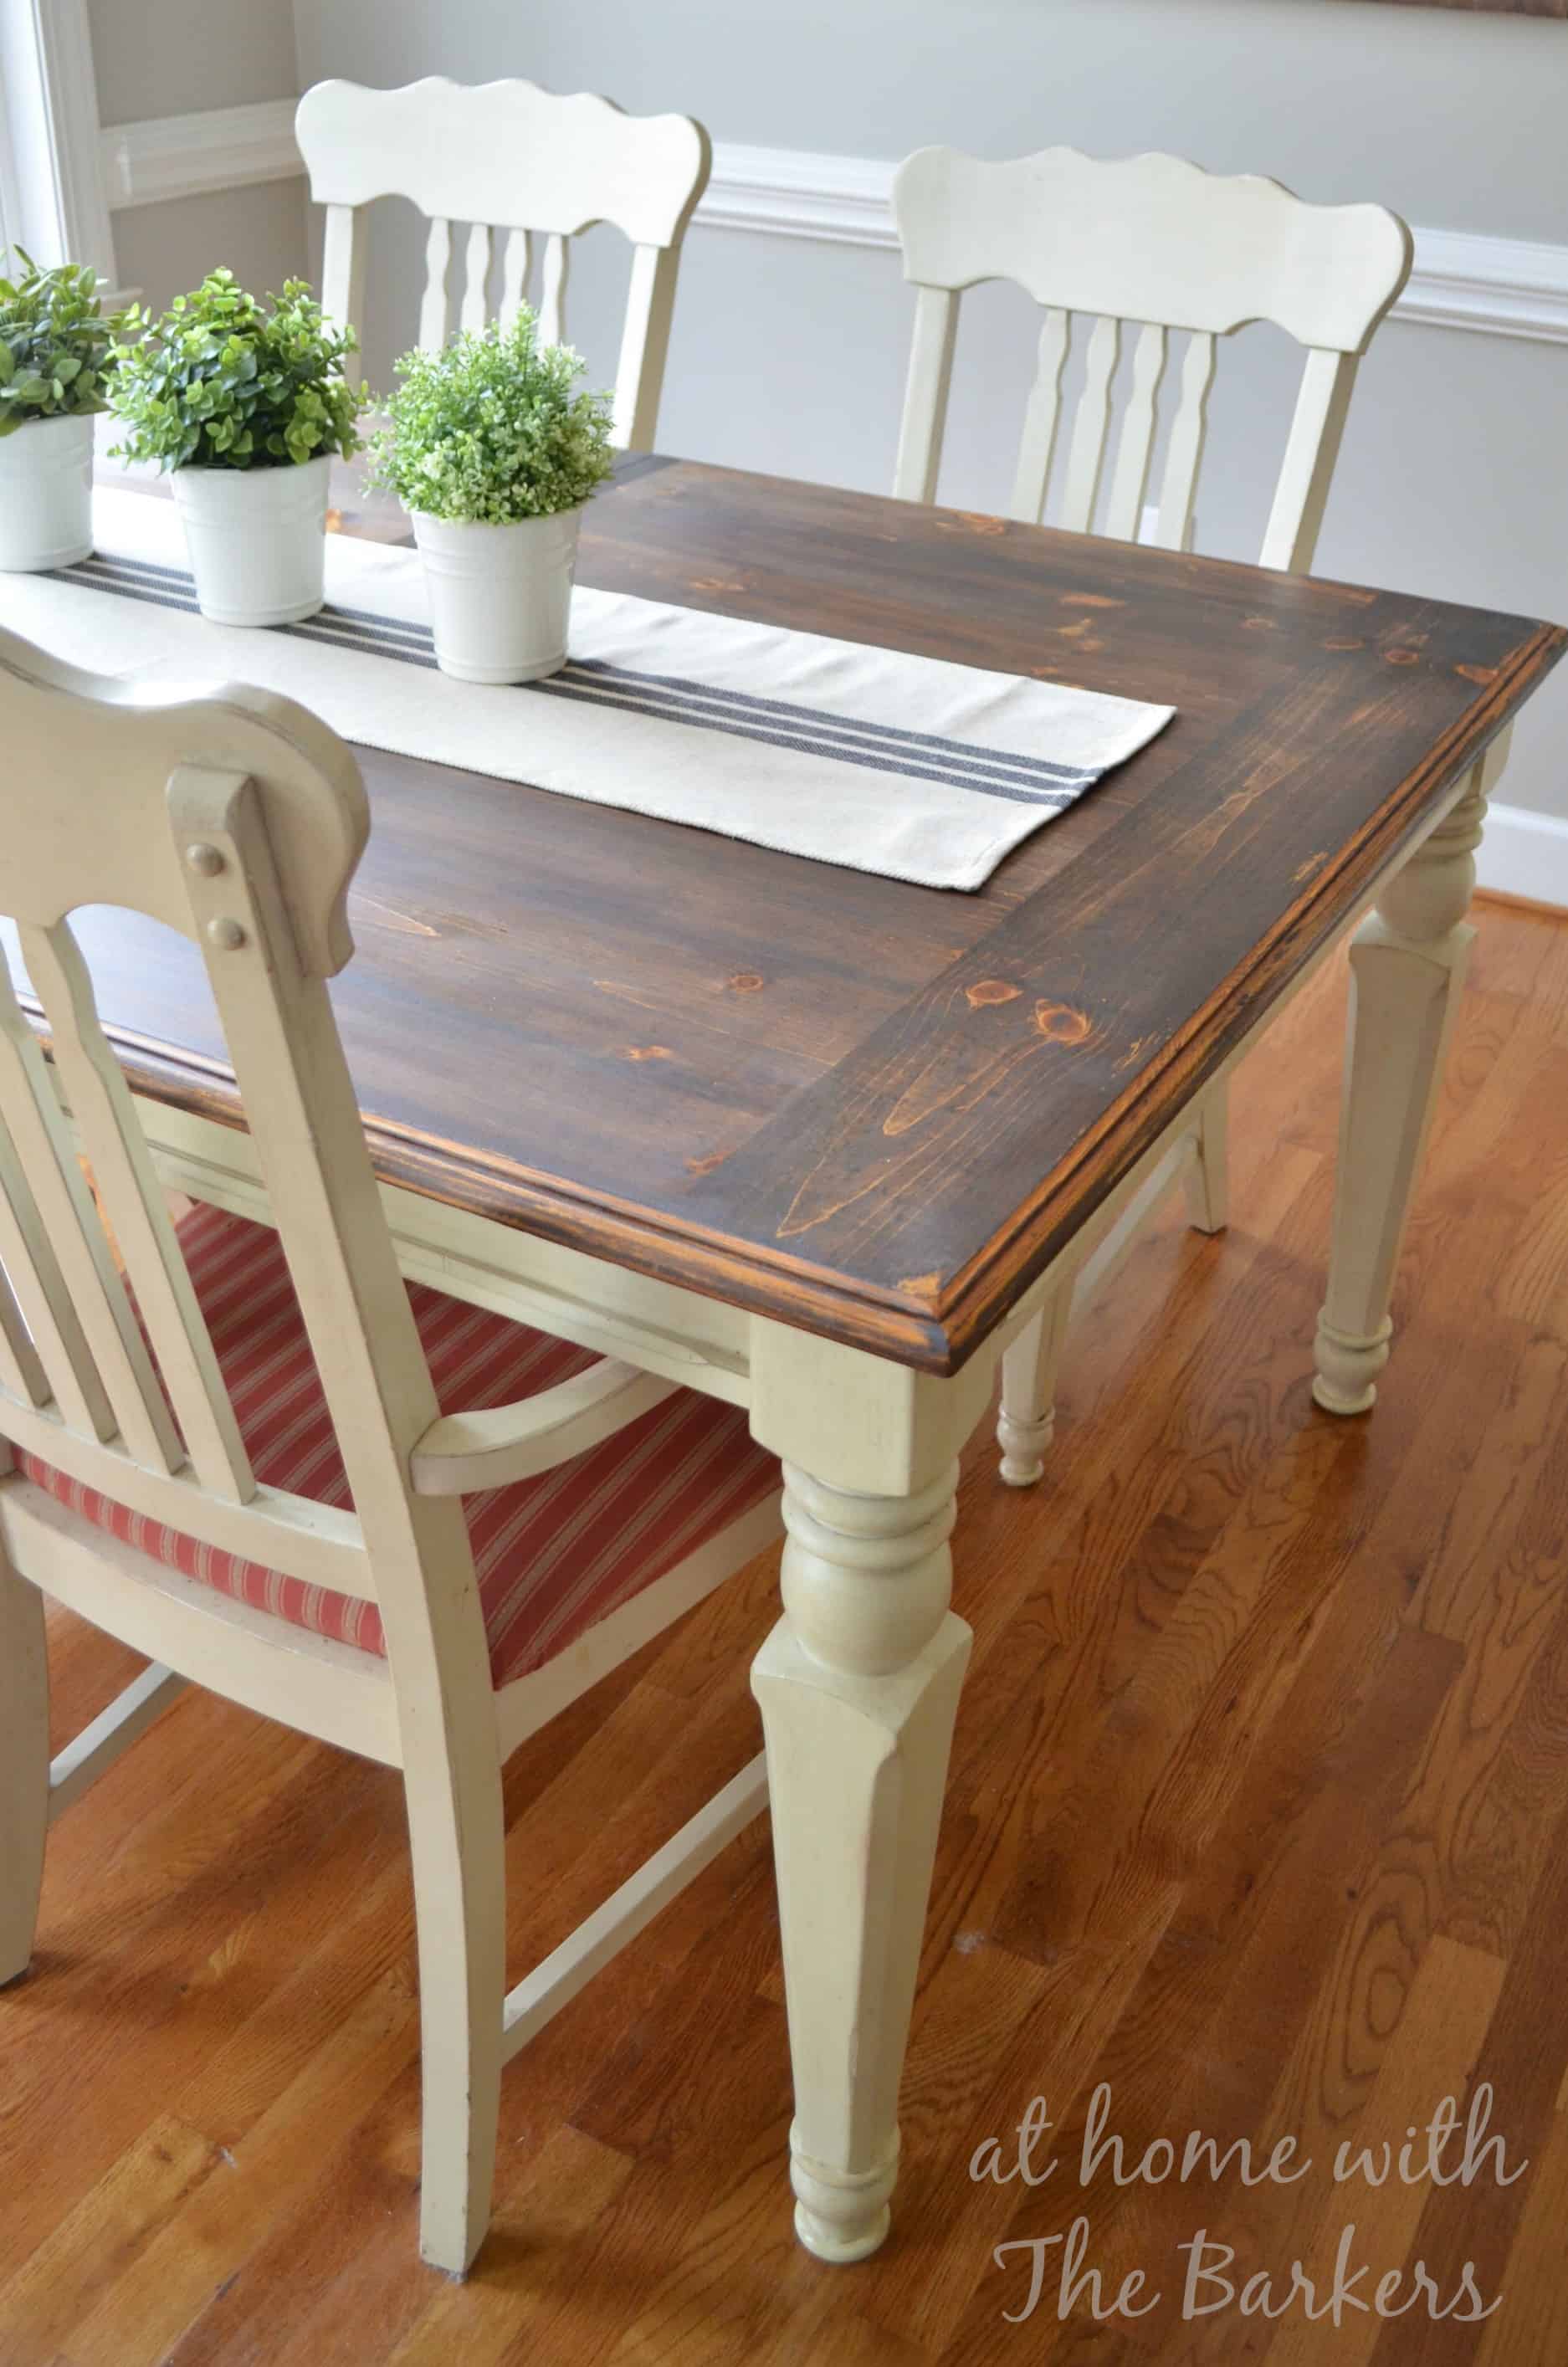 How to Distress Painted Wood for a Fabulous Farmhouse Finish